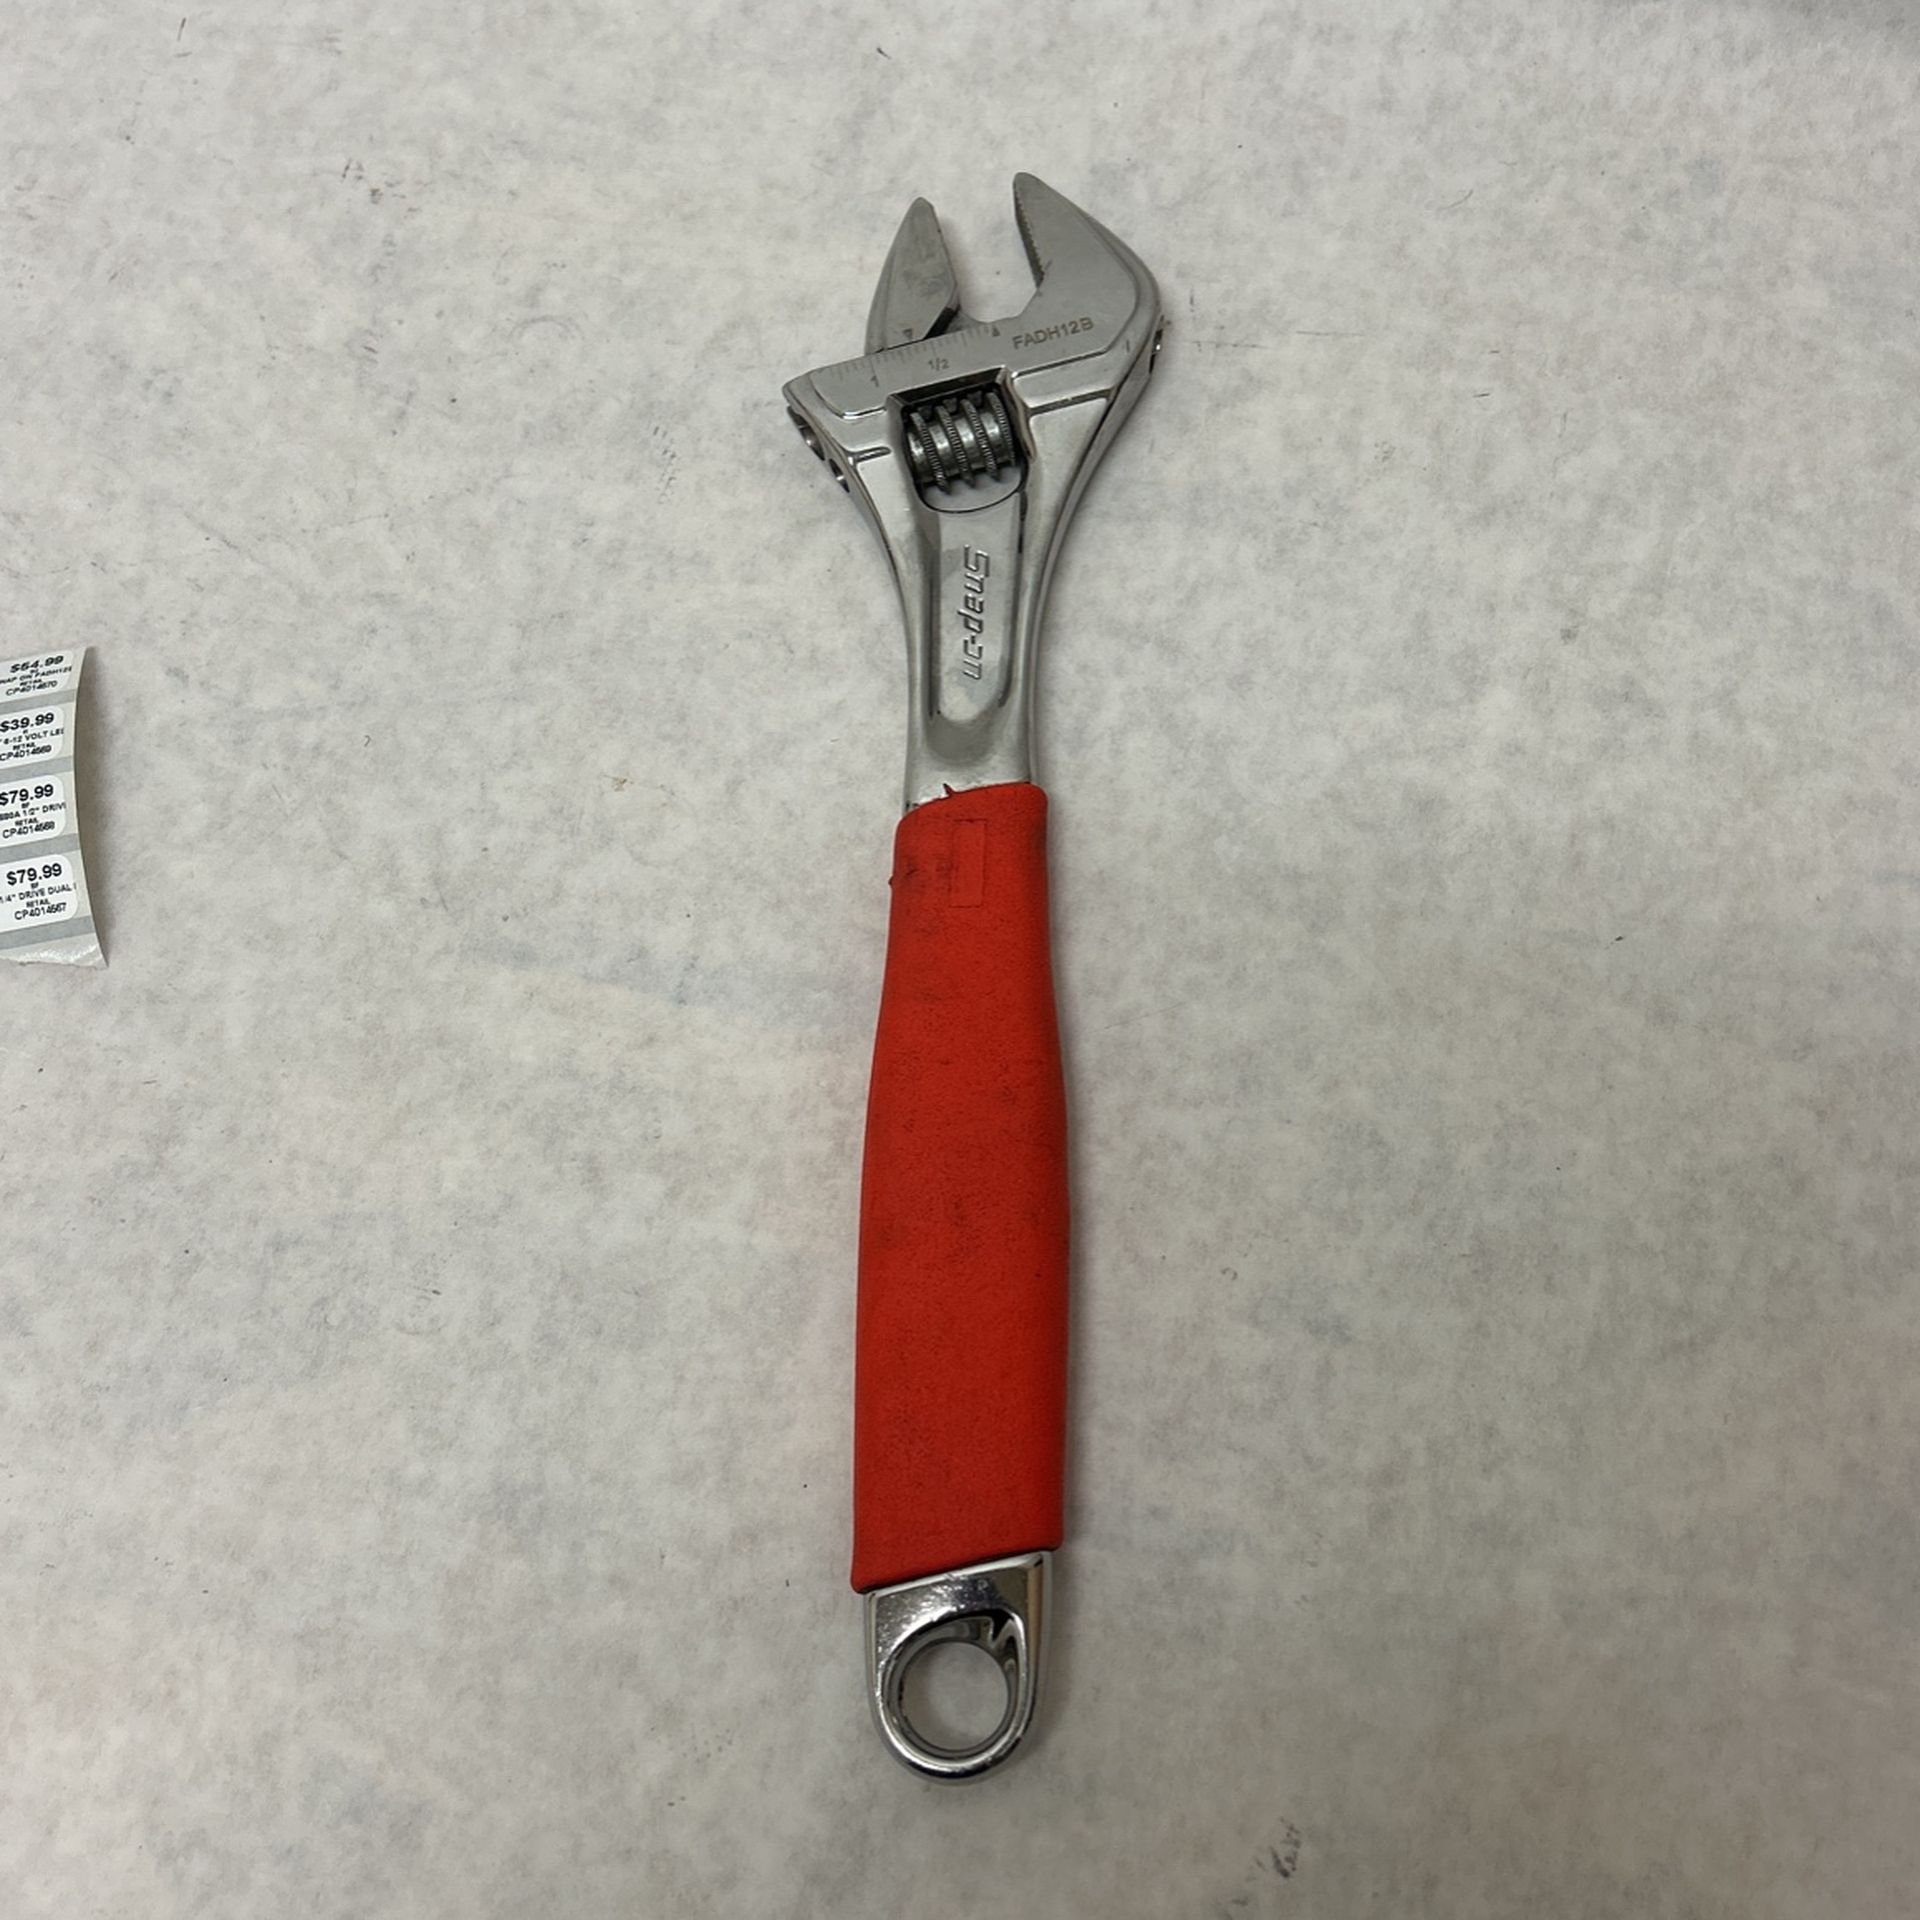 Snap on FADH12B wrench adjustable